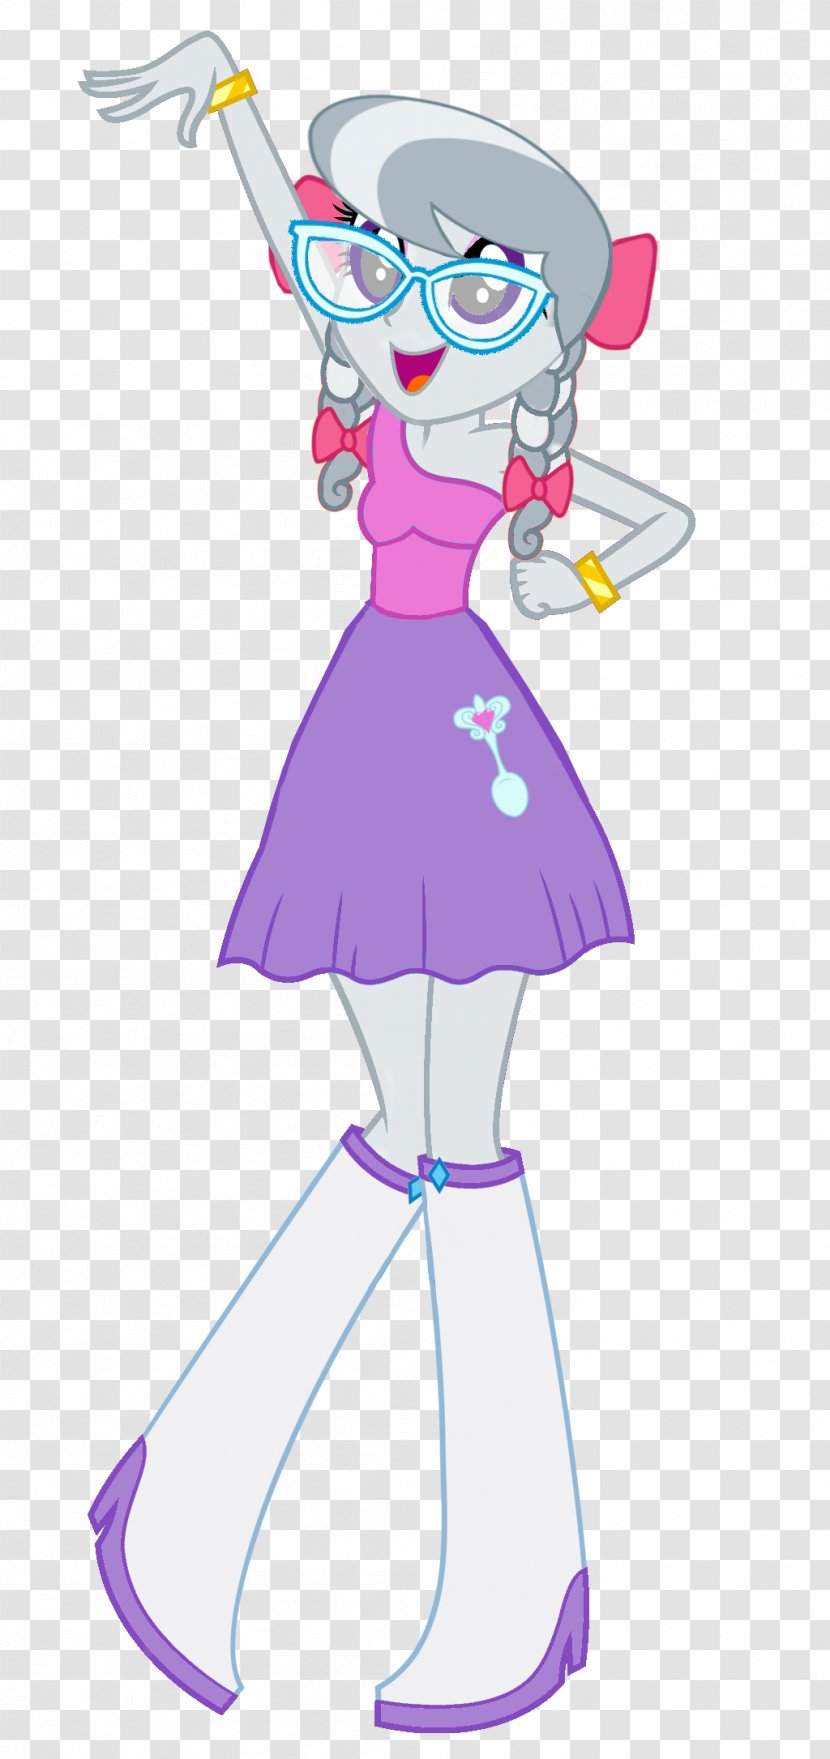 Twilight Sparkle Rarity My Little Pony: Equestria Girls - Pink - Sunset Shimmer Pony Transparent PNG